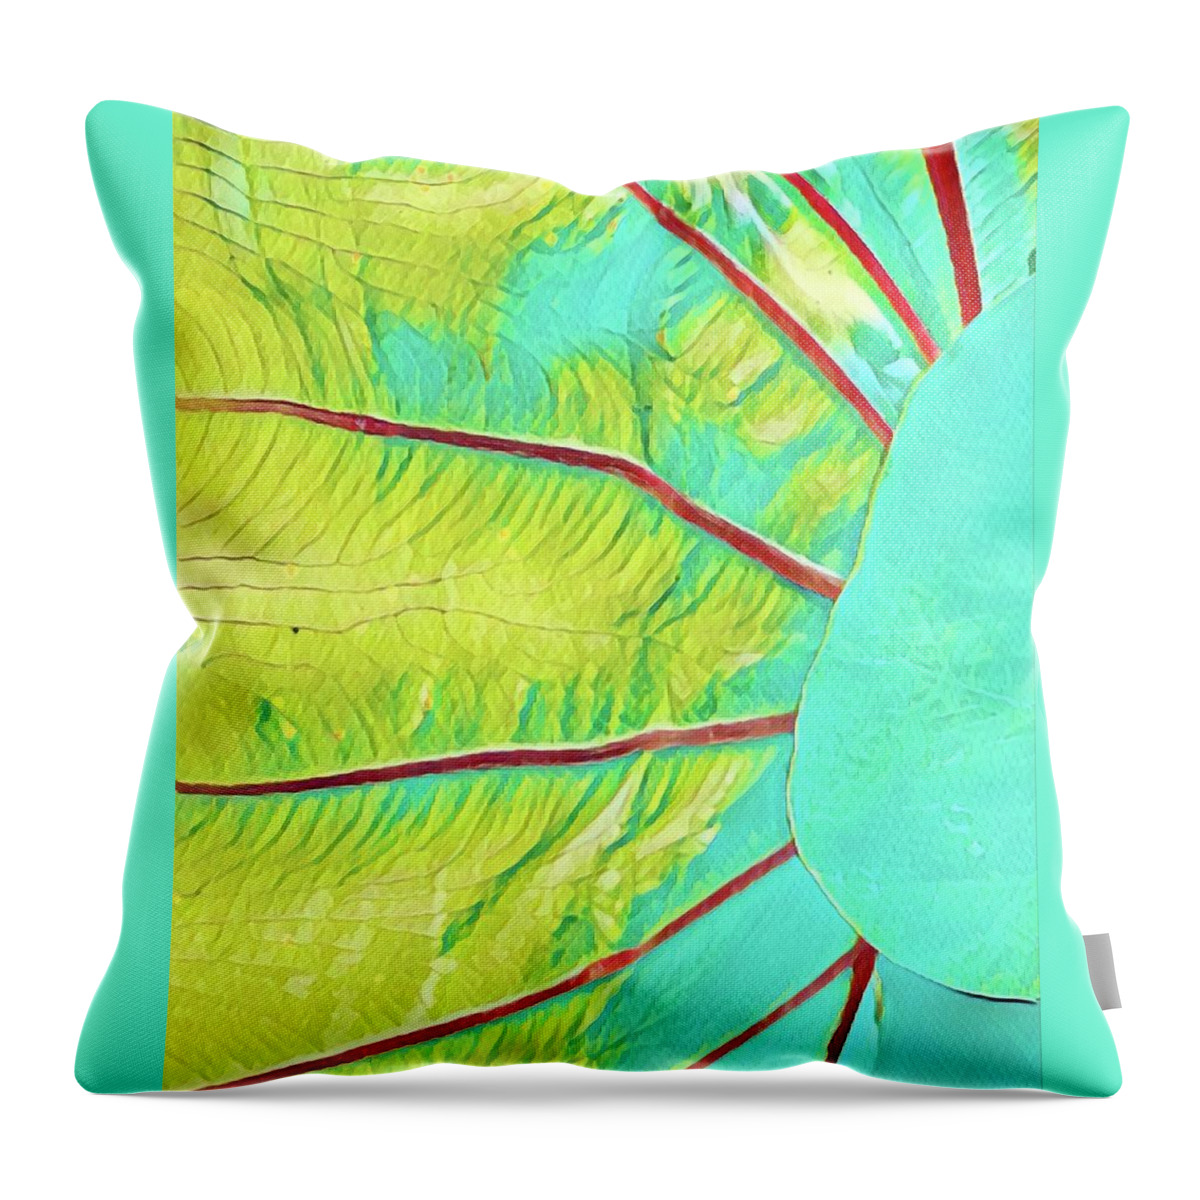 #flowersofaloha #taroleaf #turquoise #aloha Throw Pillow featuring the photograph Taro Leaf in Turquoise - The Other Side by Joalene Young